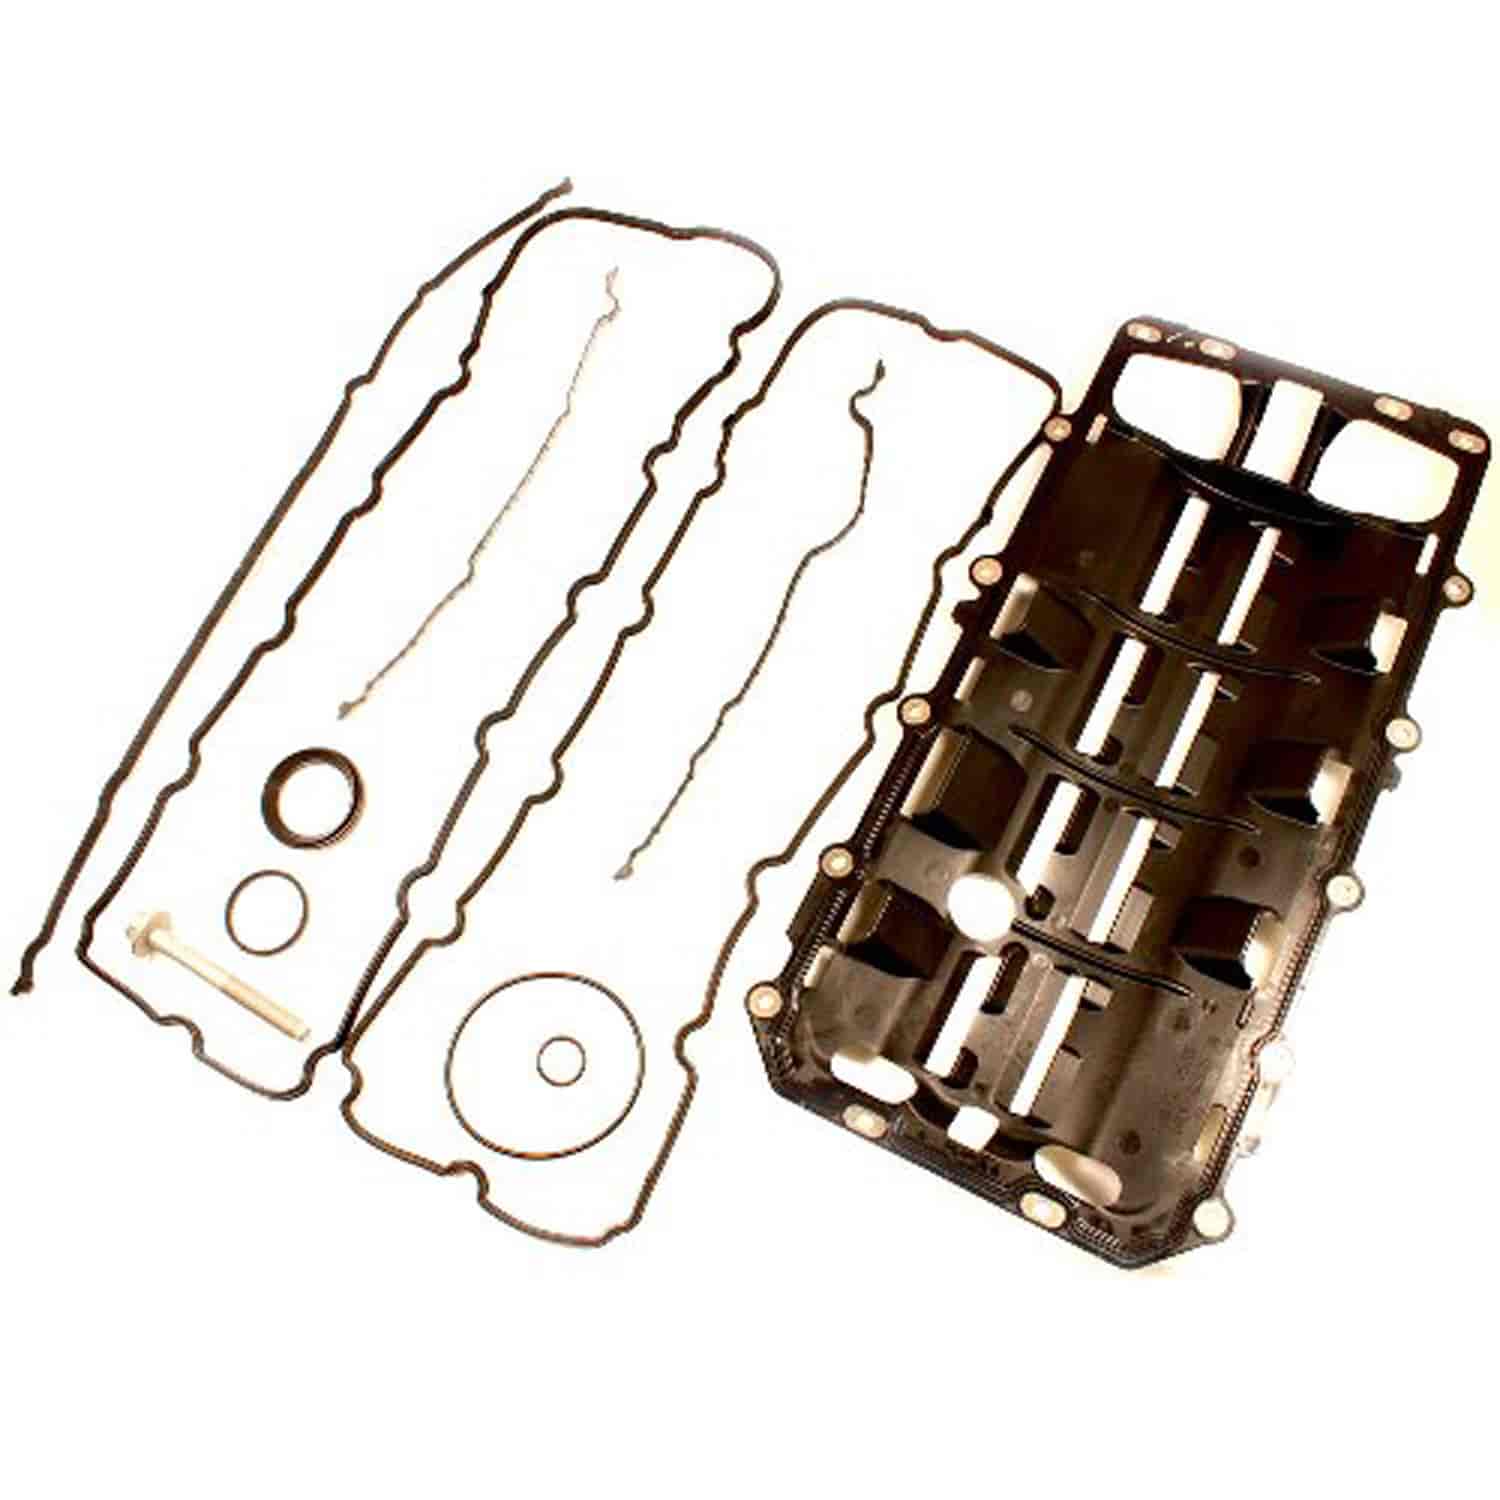 Coyote Engine Oil Pump Installation Kit 5.0L Coyote Engines Kit Includes: